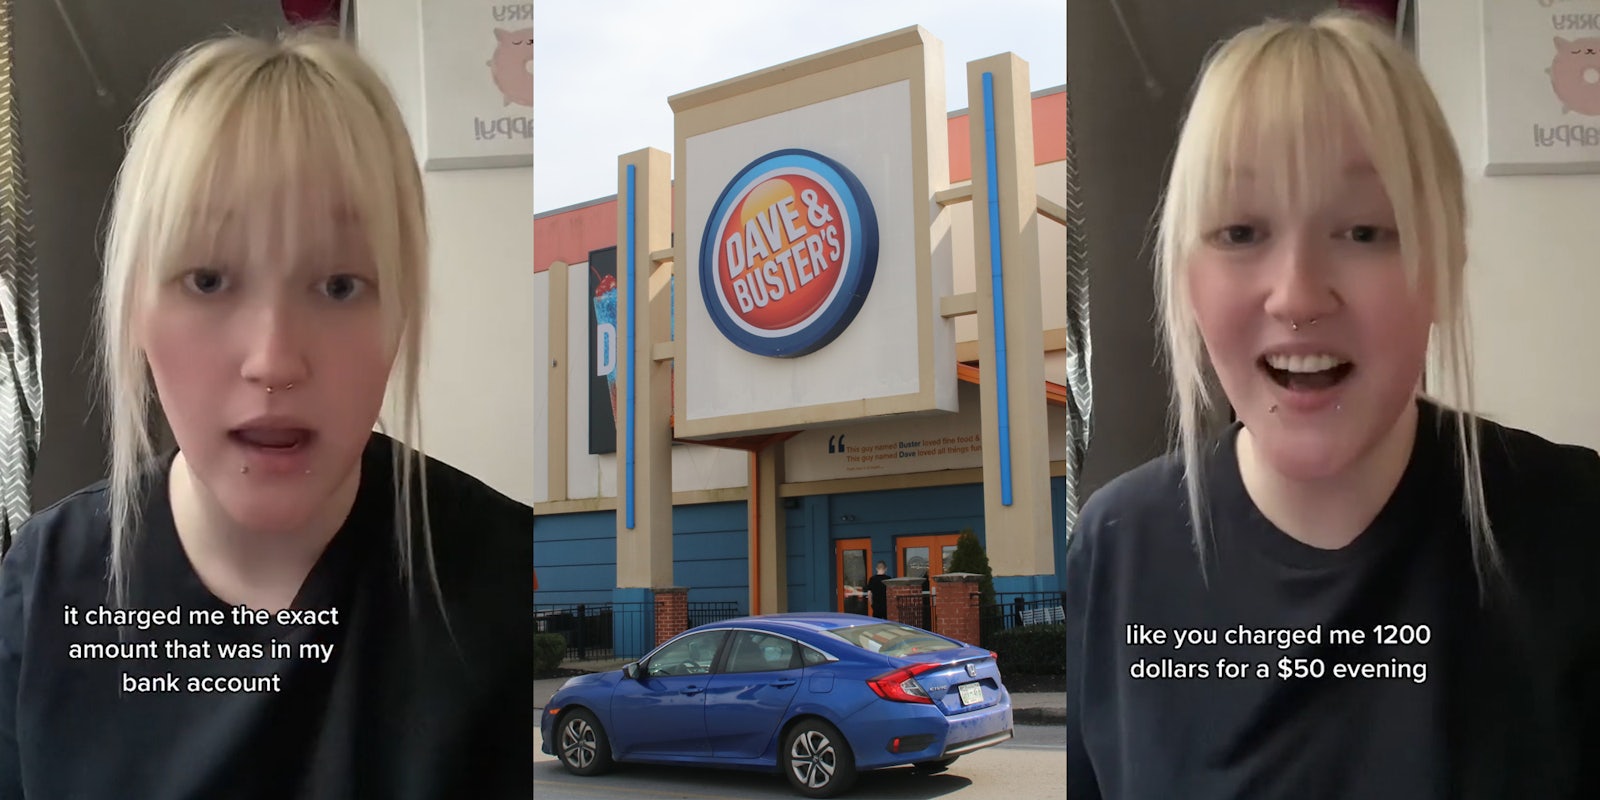 Dave and Buster's customer speaking with caption 'it charged me the exact amount that was in my bank account' (l) Dave and Buster's building entrance with sign (c) Dave and Buster's customer speaking with caption 'like you charged me 1200 dollars for a $50 evening' (r)